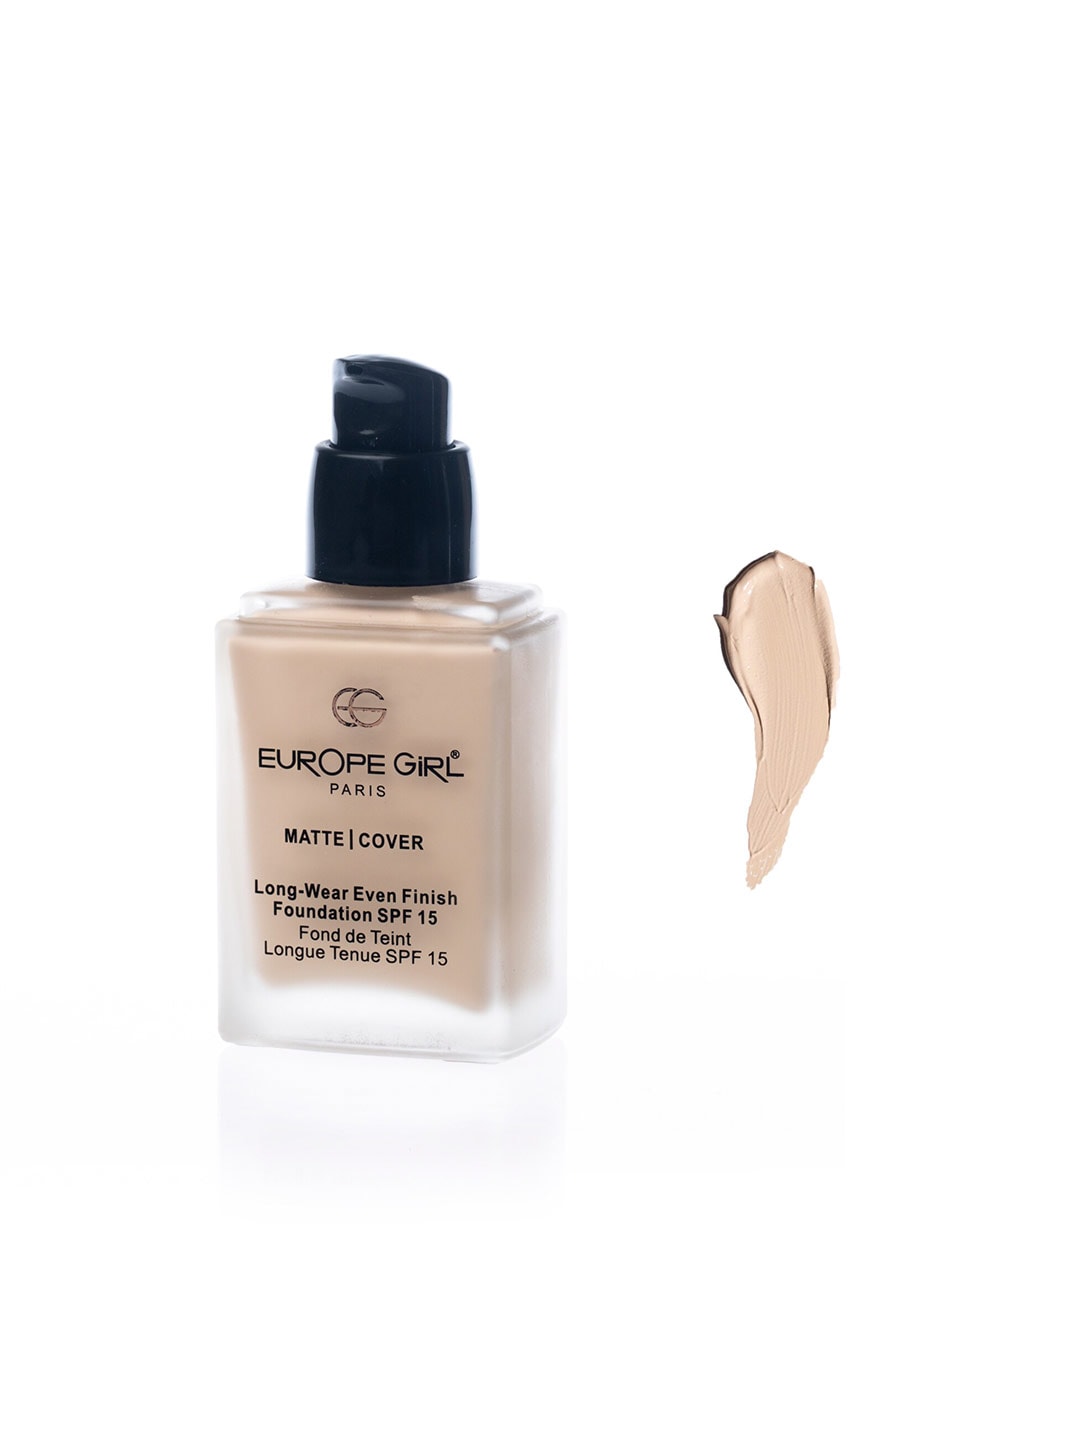 EUROPE GIRL Matte Cover Long Wear SPF 15 Even Finish Foundation 30 ml - Shade 130 Price in India